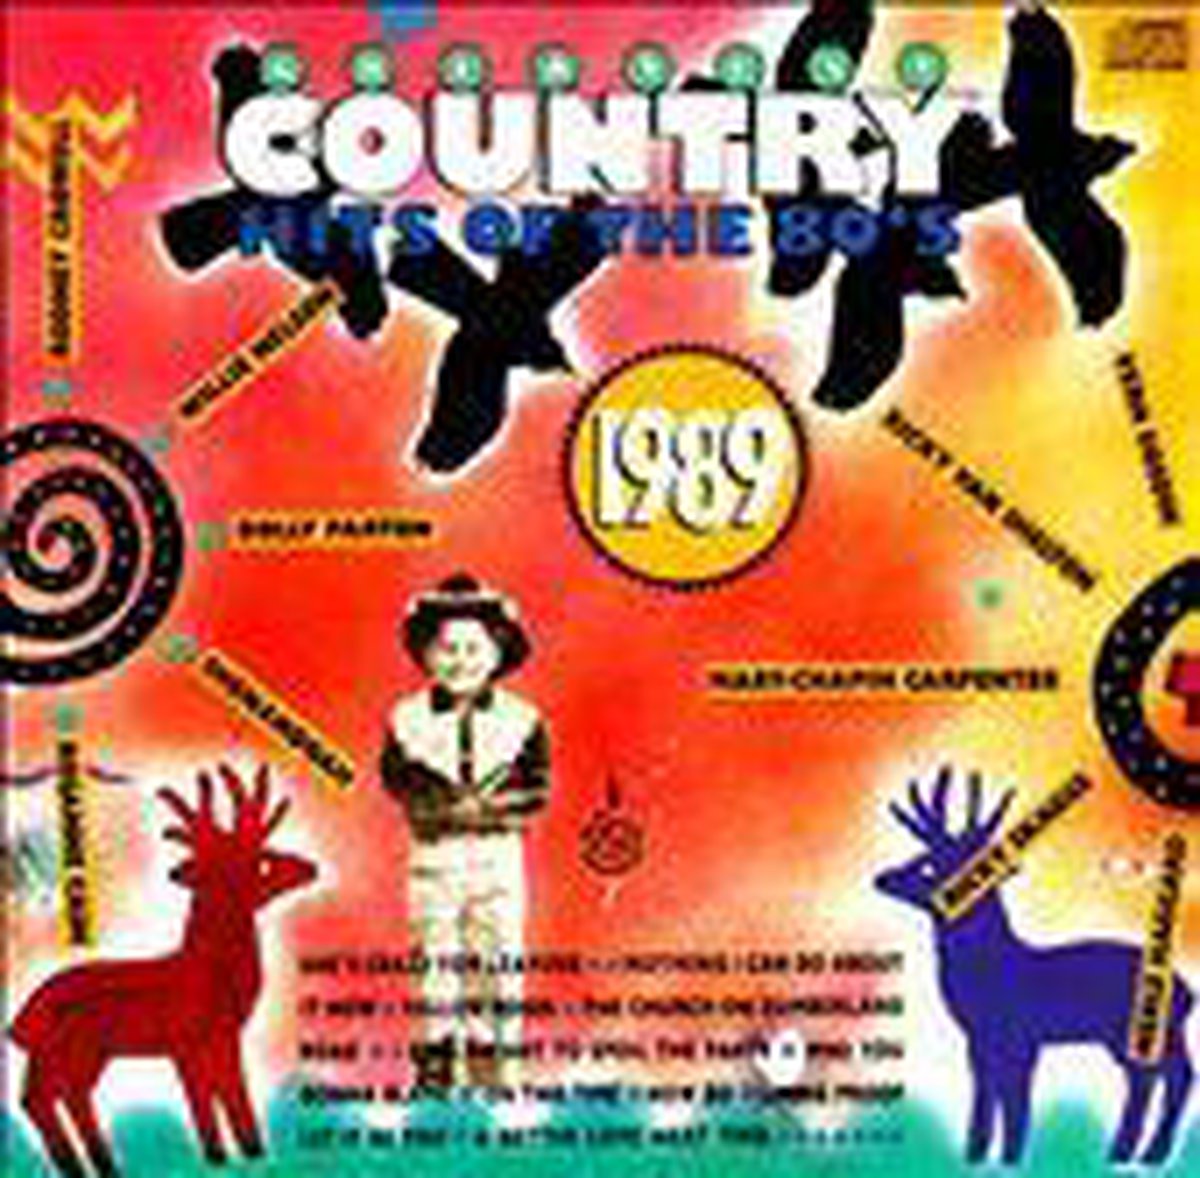 Great Country Hits of the 80's: 1989 - various artists